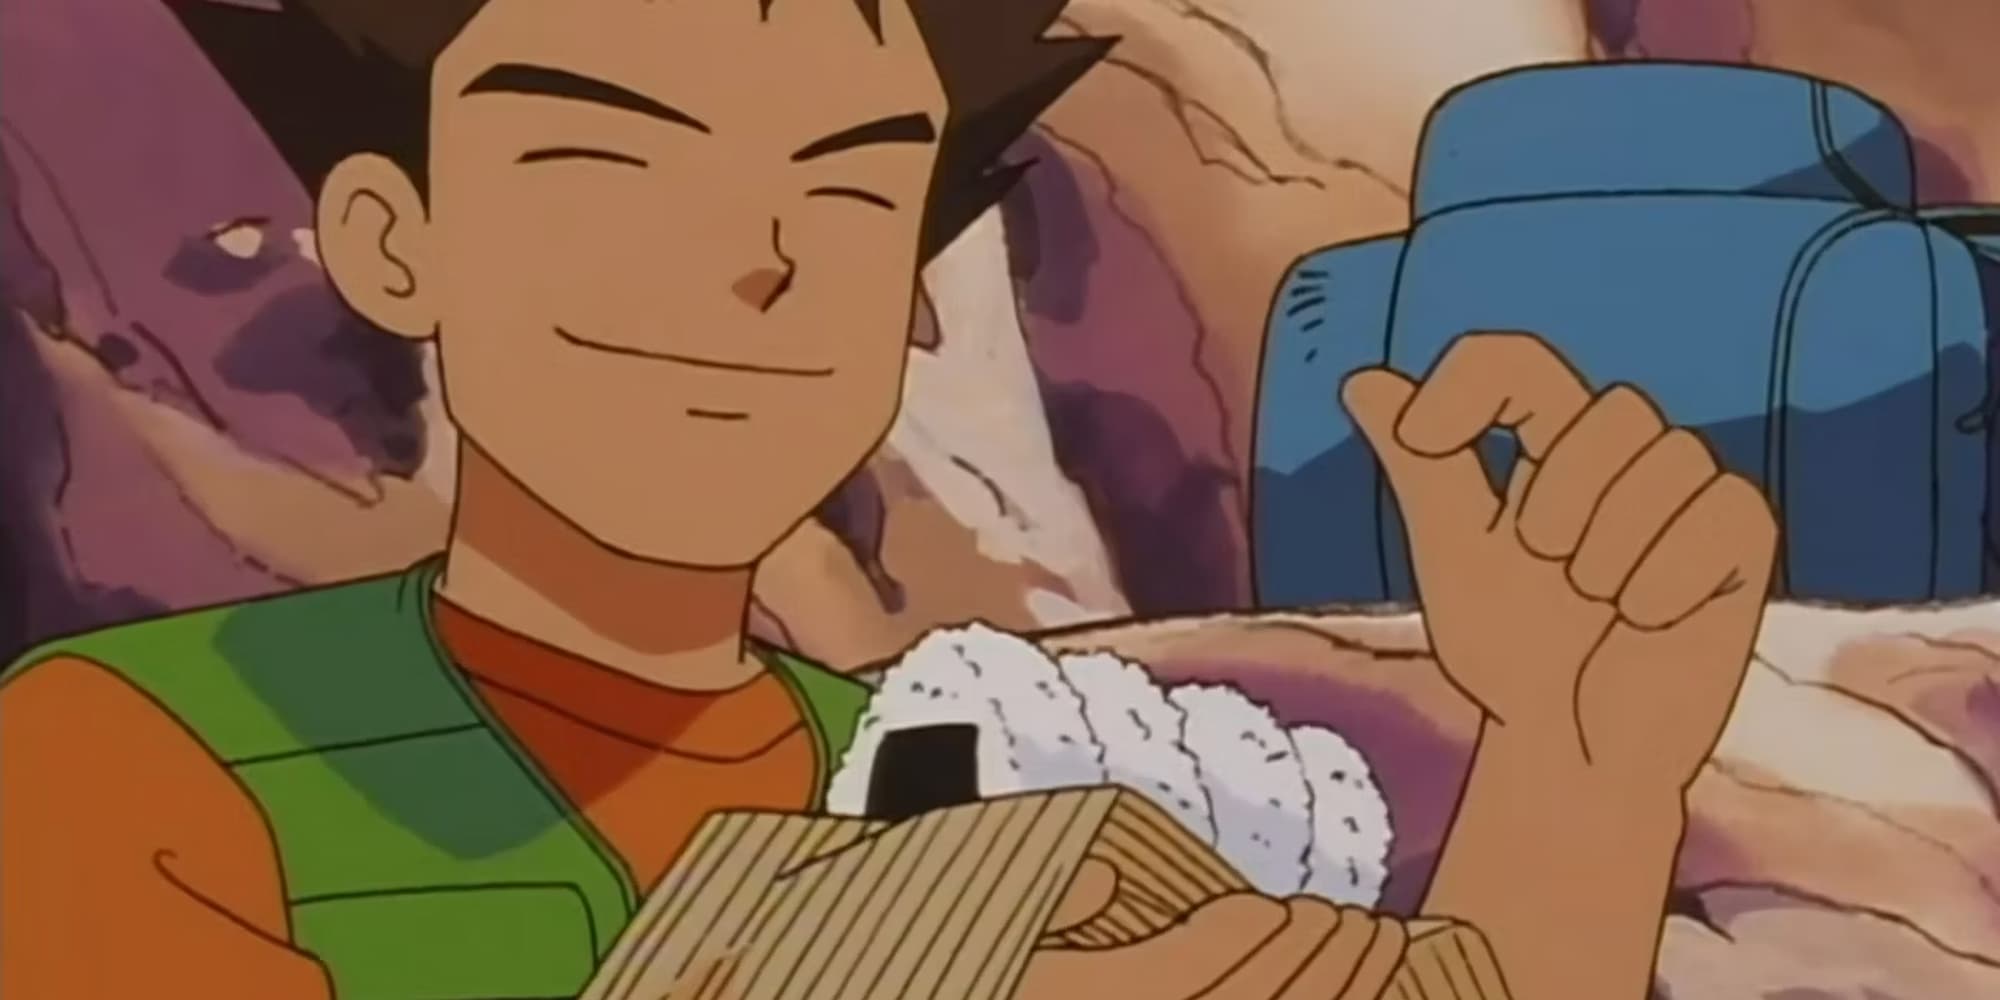 Brock eating a rice ball in Pokemon